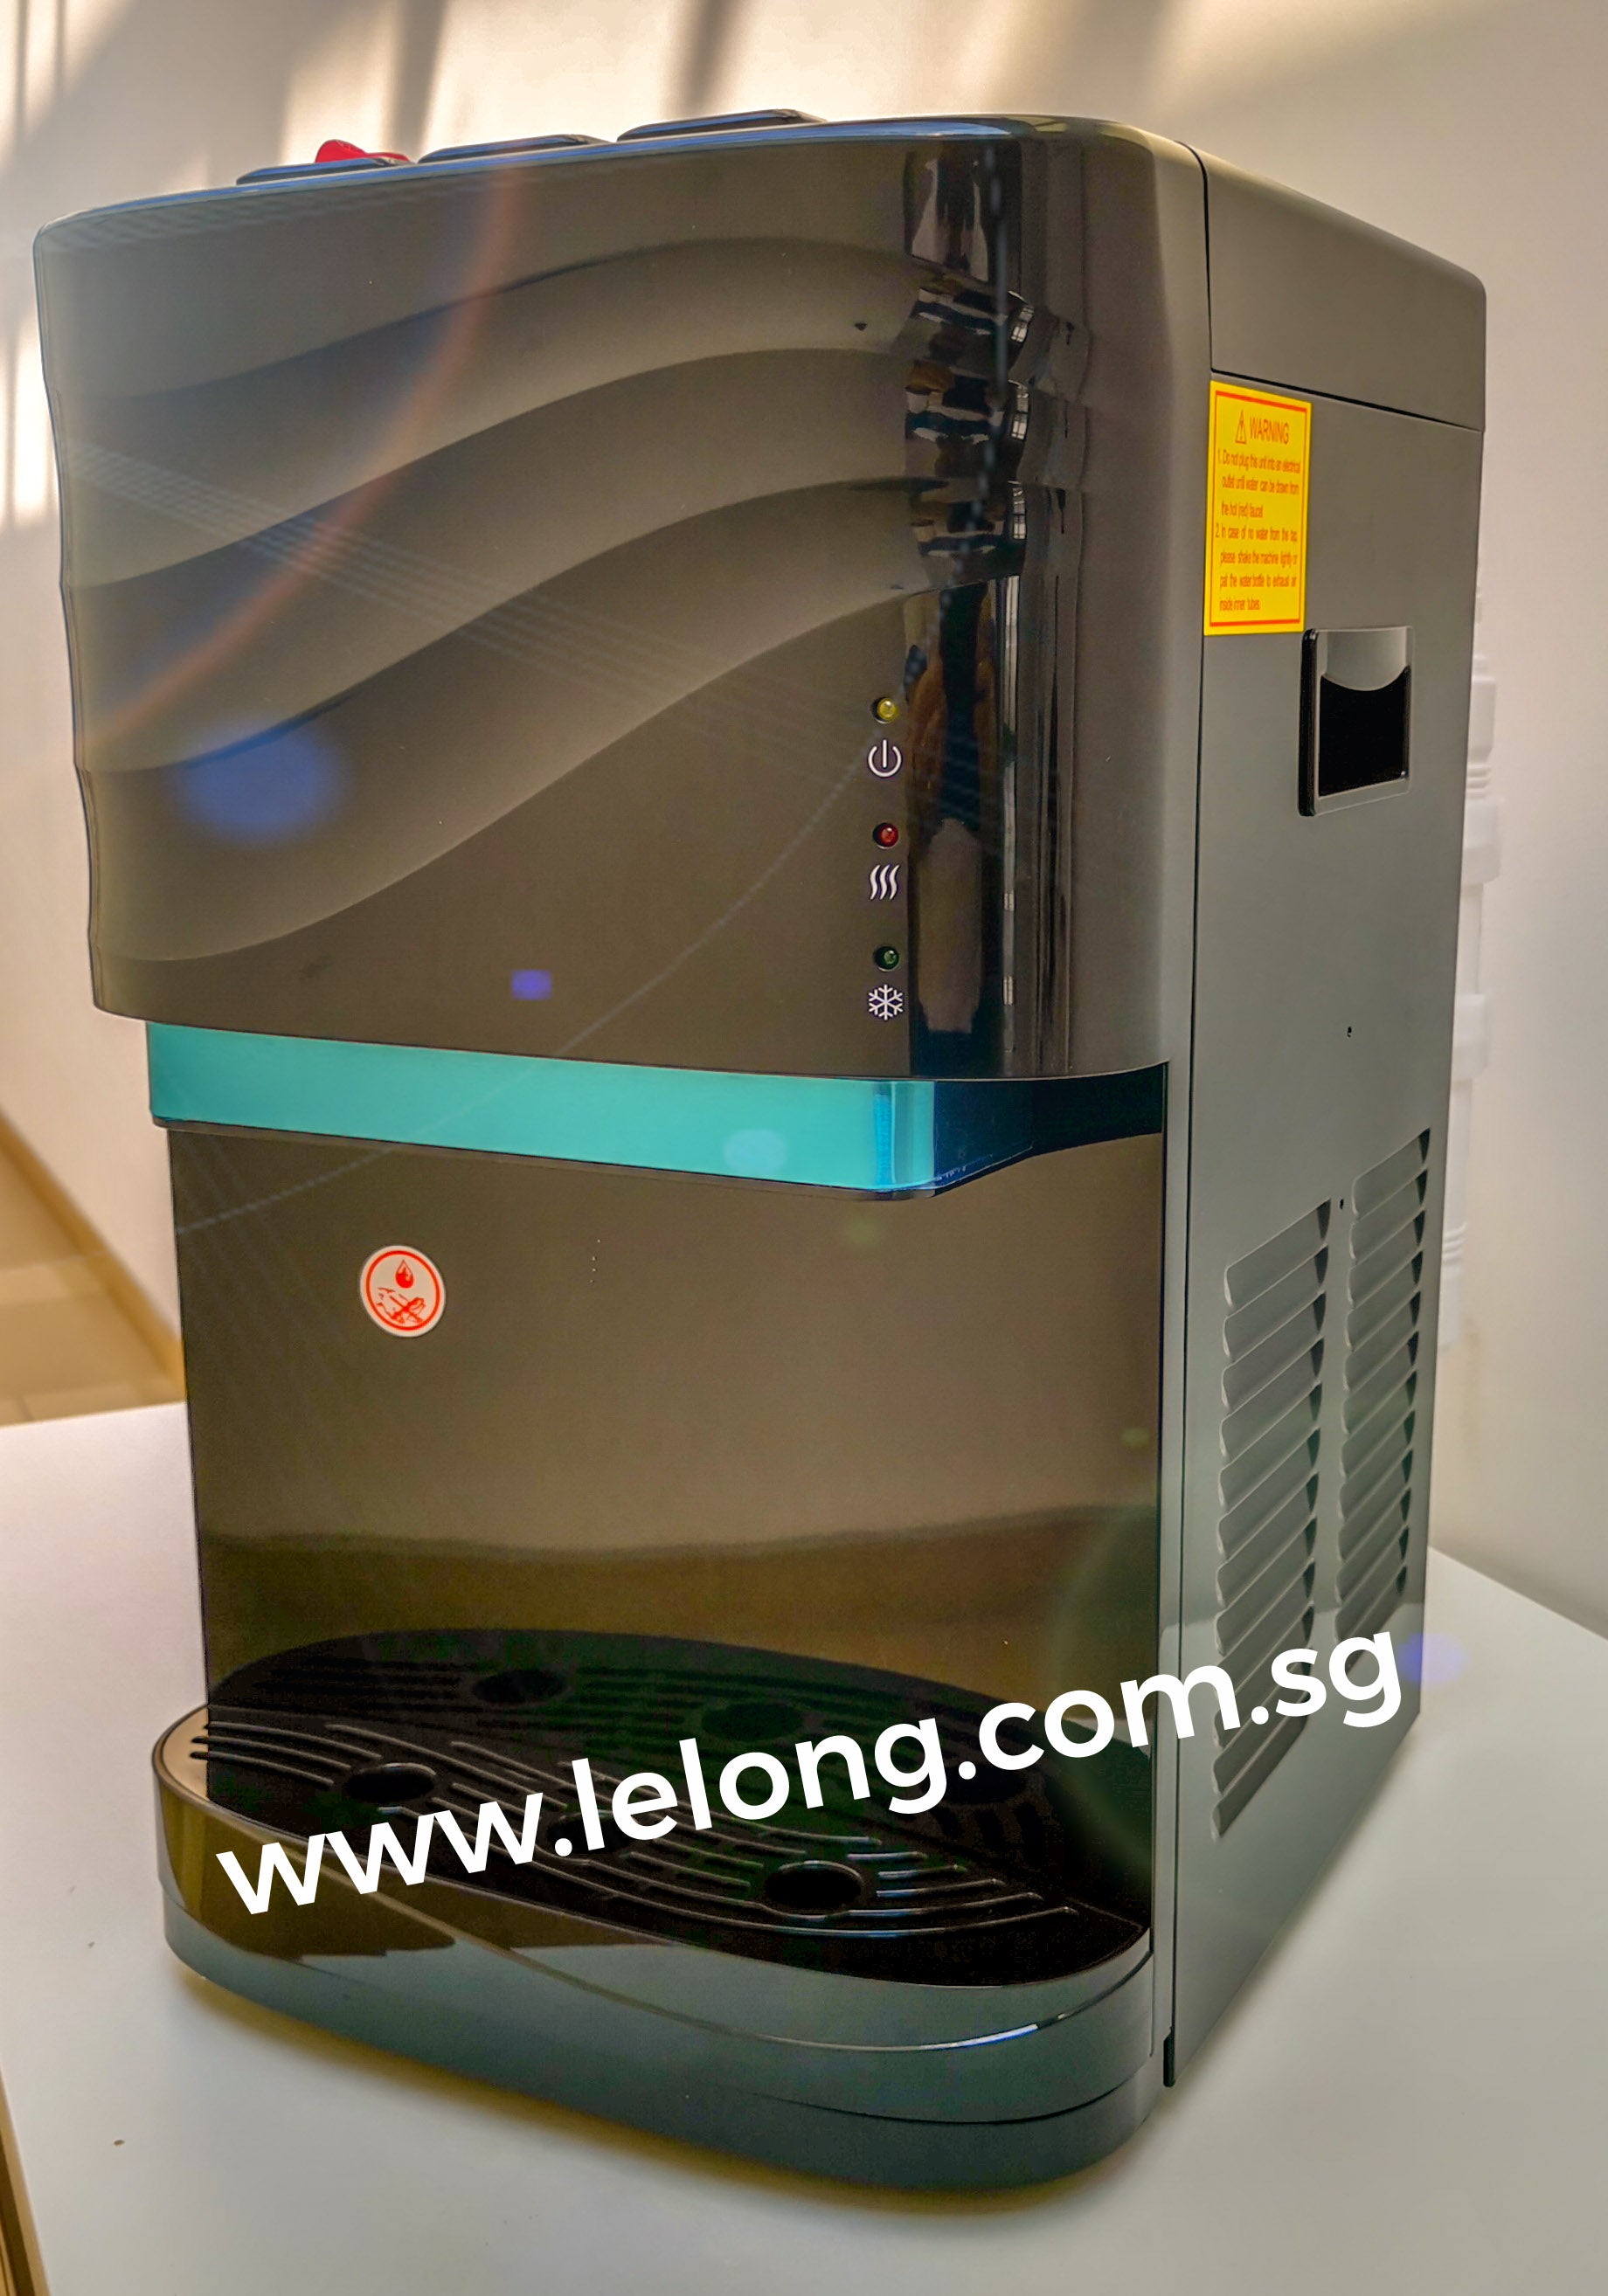 LL1631 HOT, COLD, AMBIENT, Water Dispenser